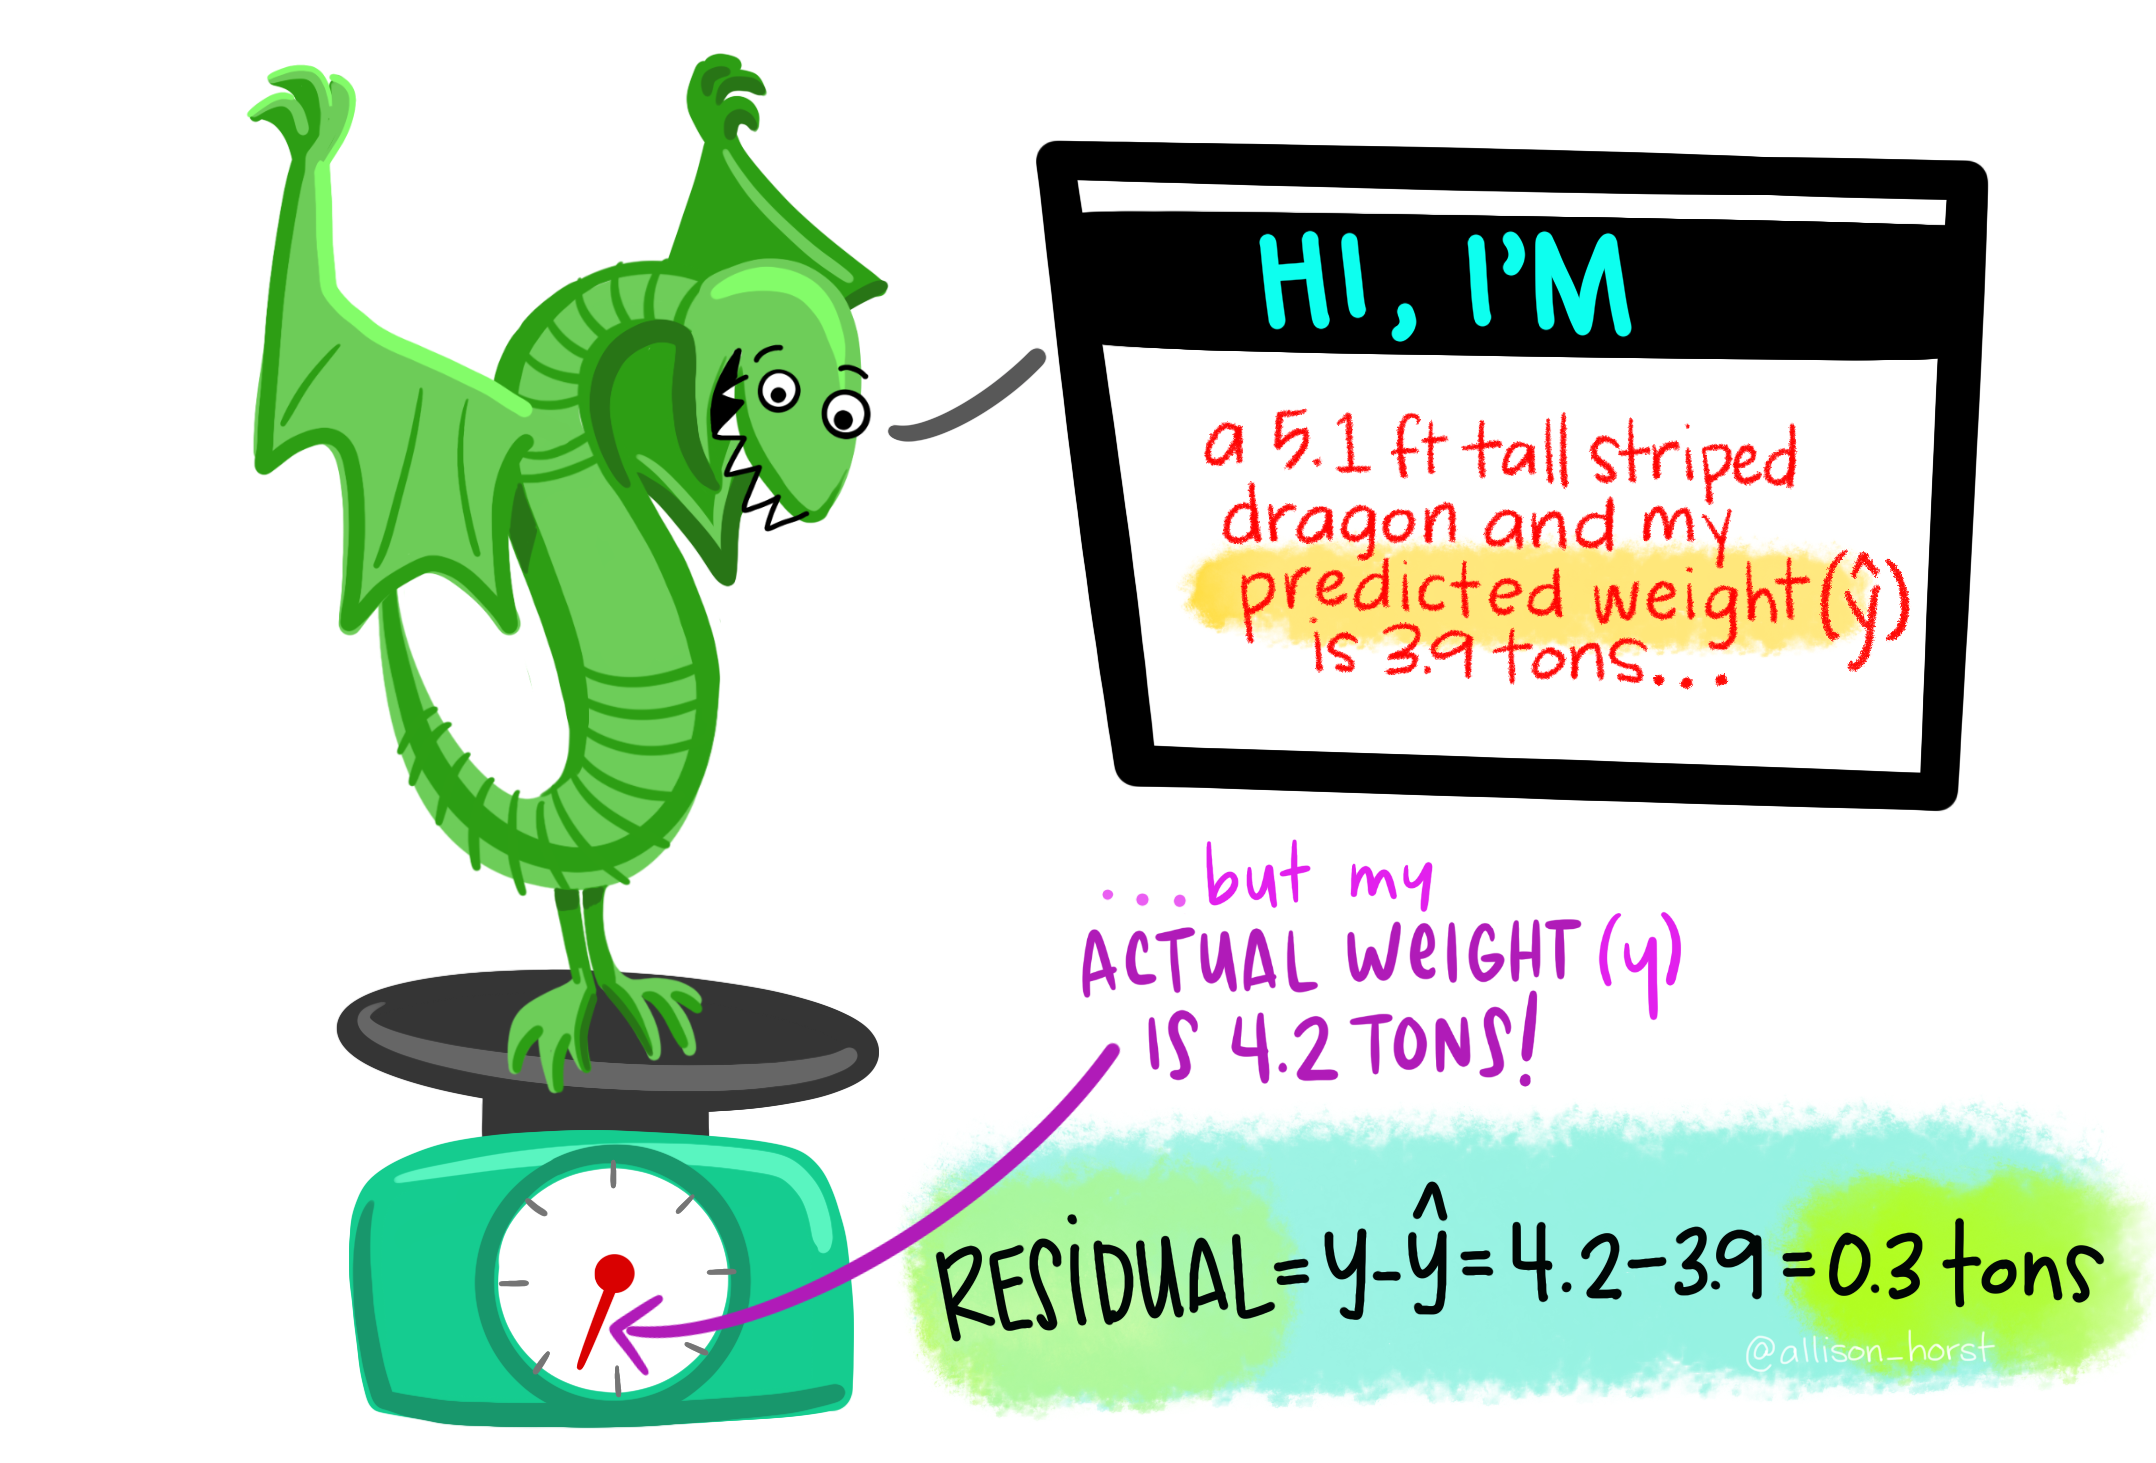 Residuals are the information left over from the model. For instance if a dragon's predicted weight is 3.9 tons but her actual weigh is 4.2 tons, the residual would be 0.3 tons